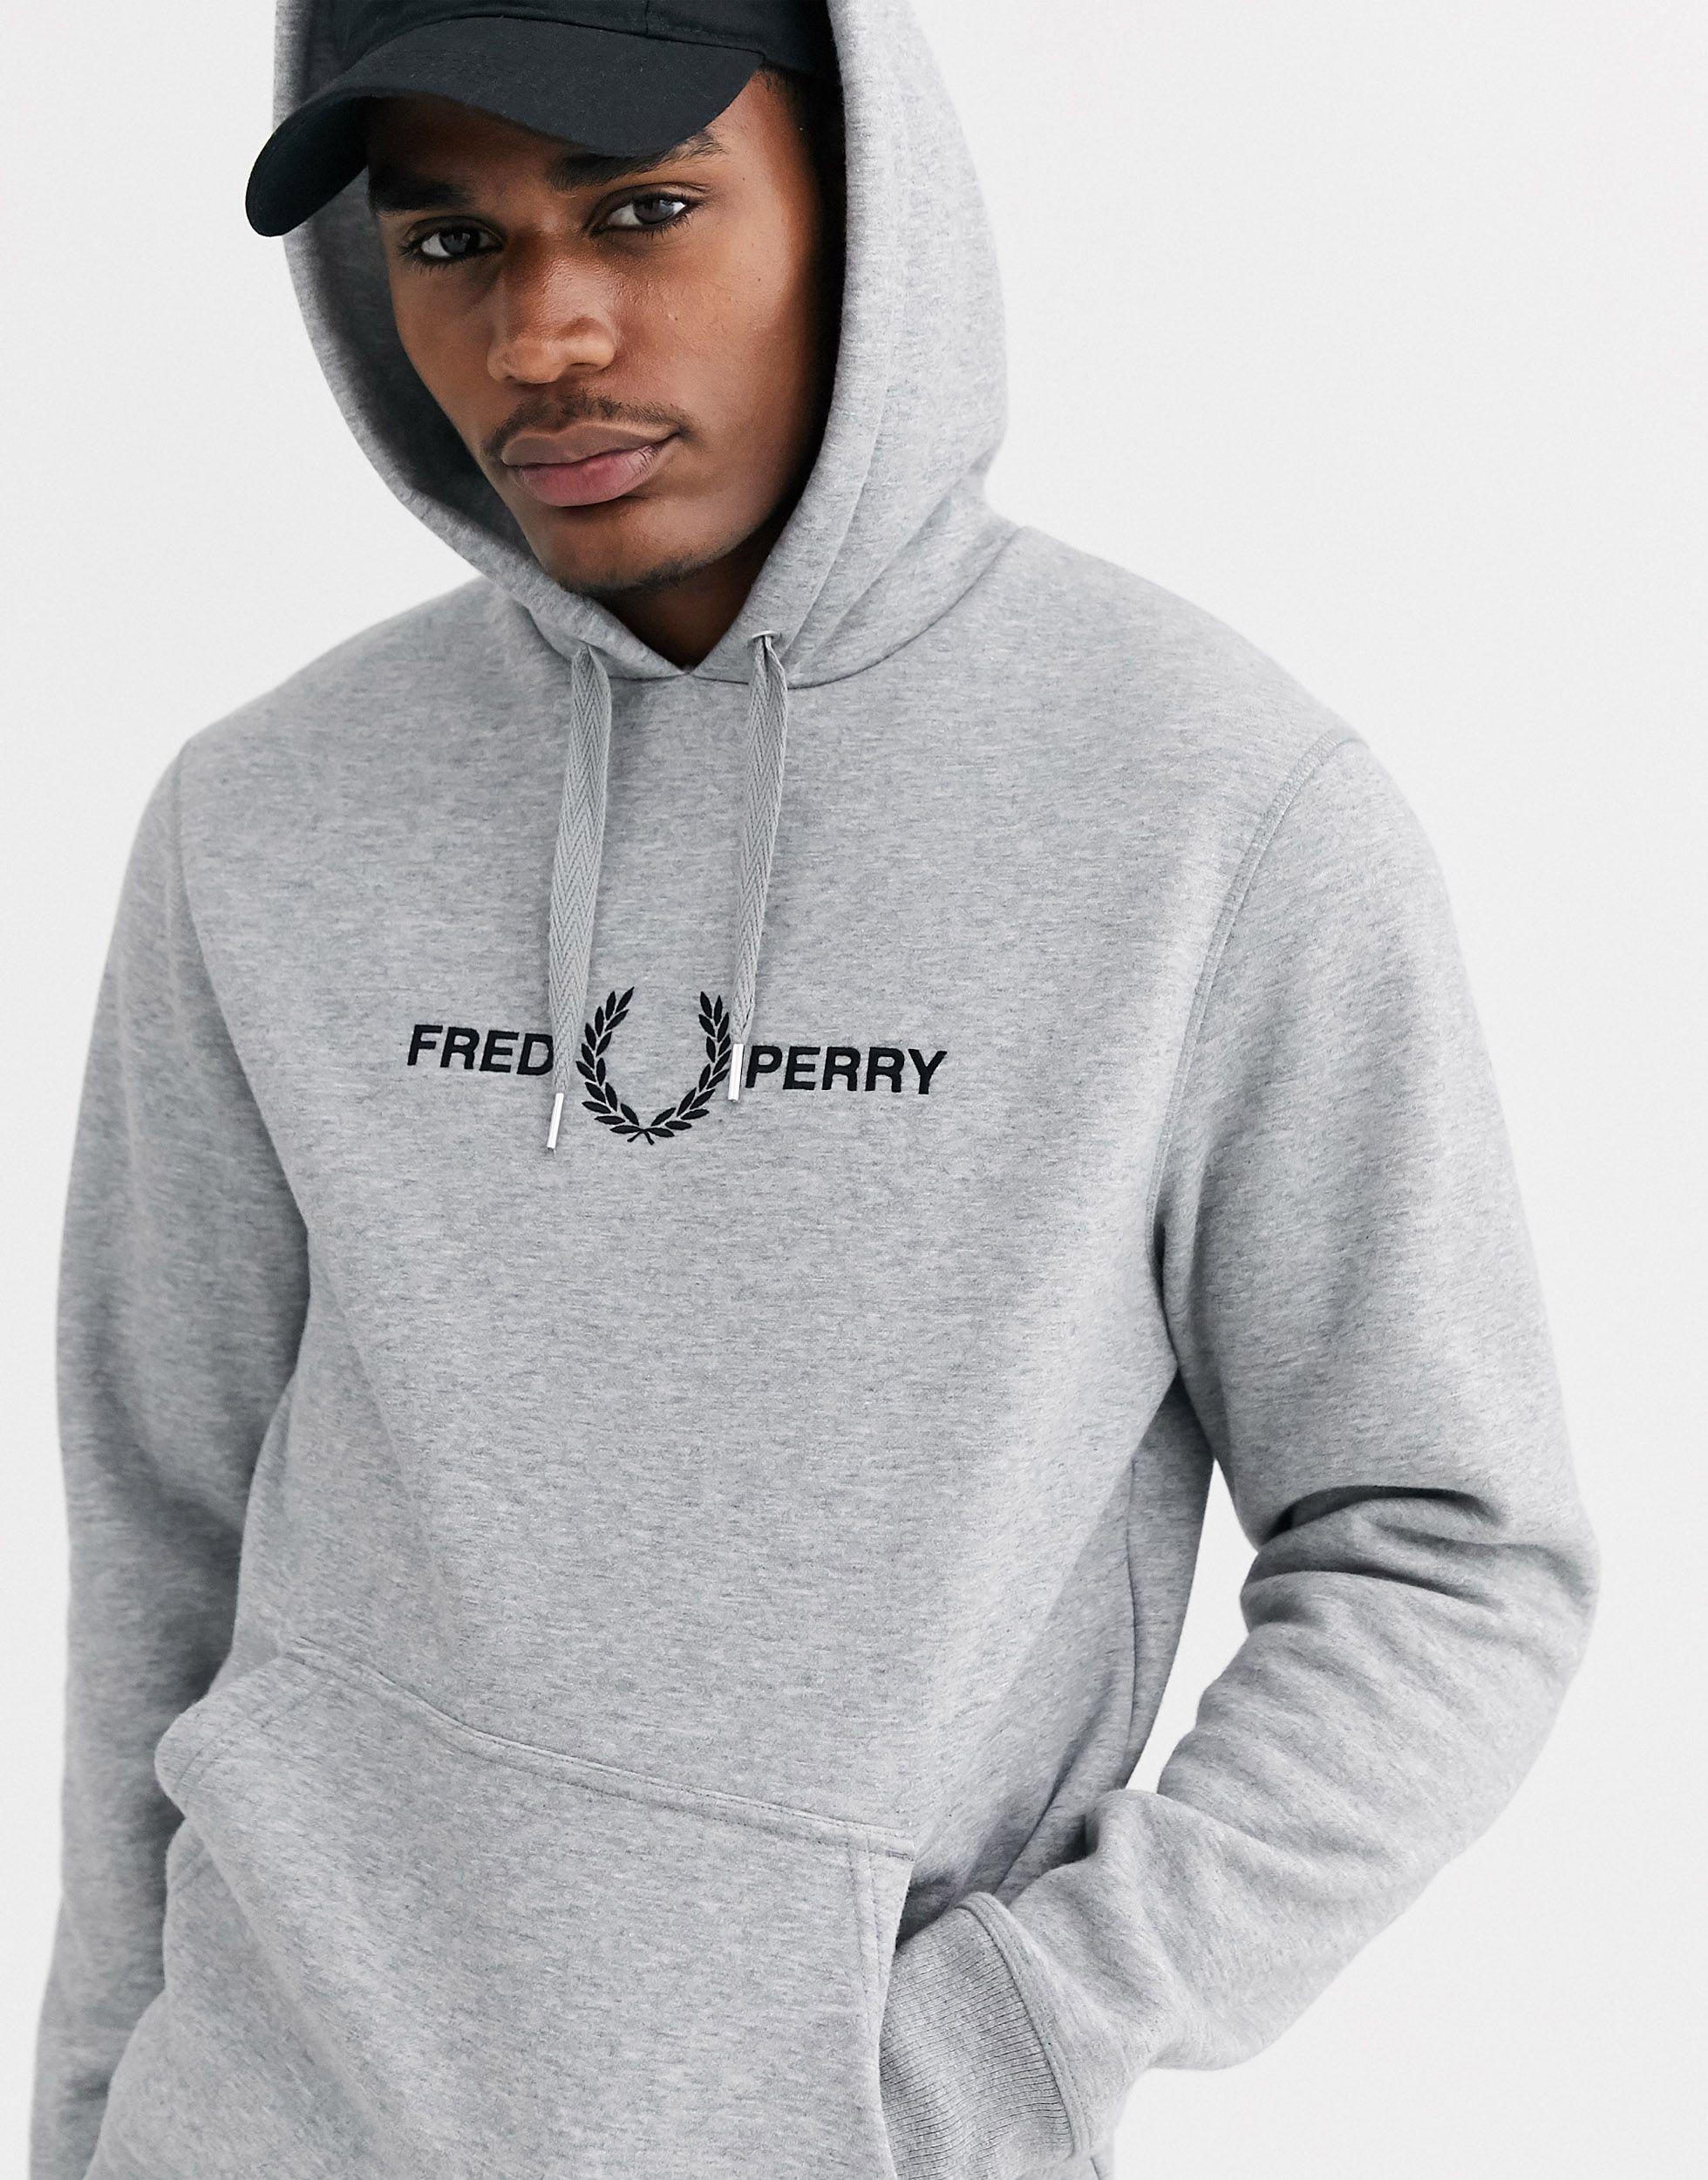 Fred Perry Embroidered Chest Logo Hoodie in Gray for Men - Lyst